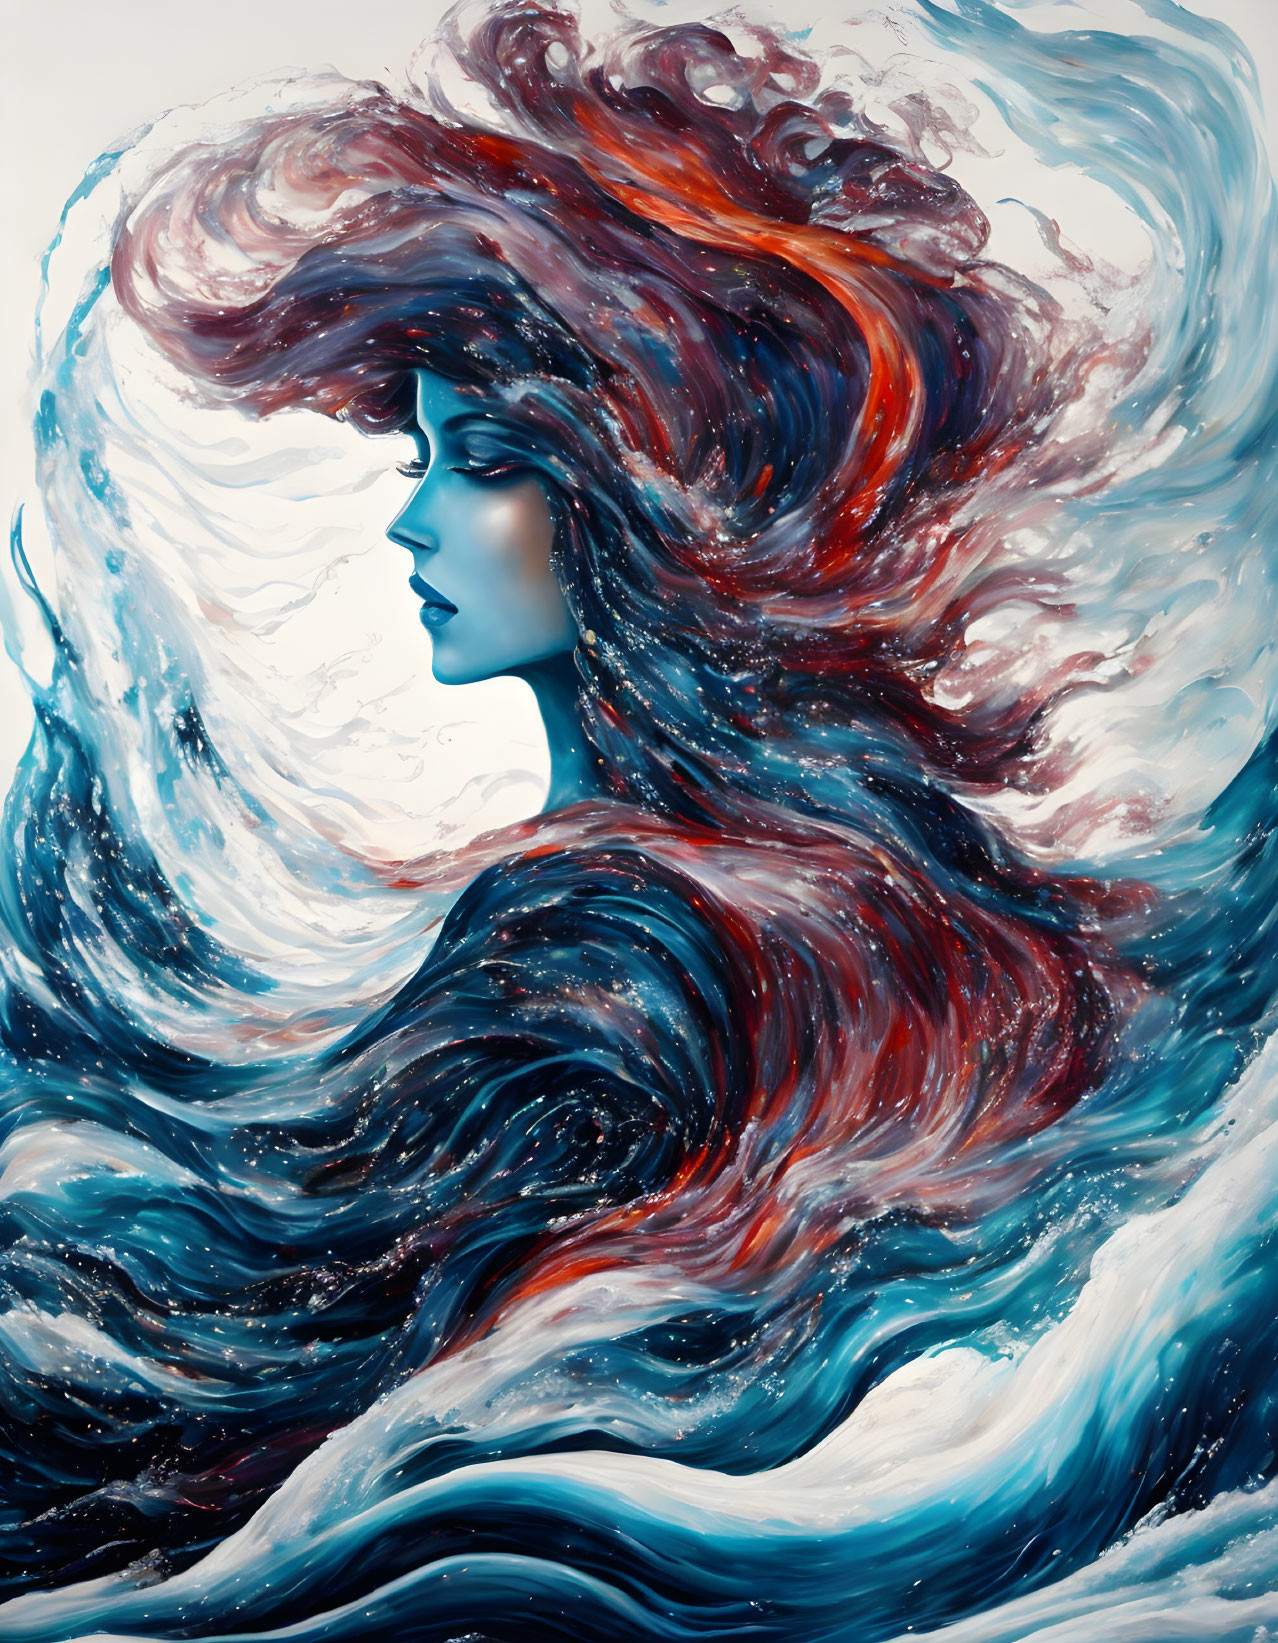 Abstract artwork: Woman with flowing hair merging with blue and red abstract waves.